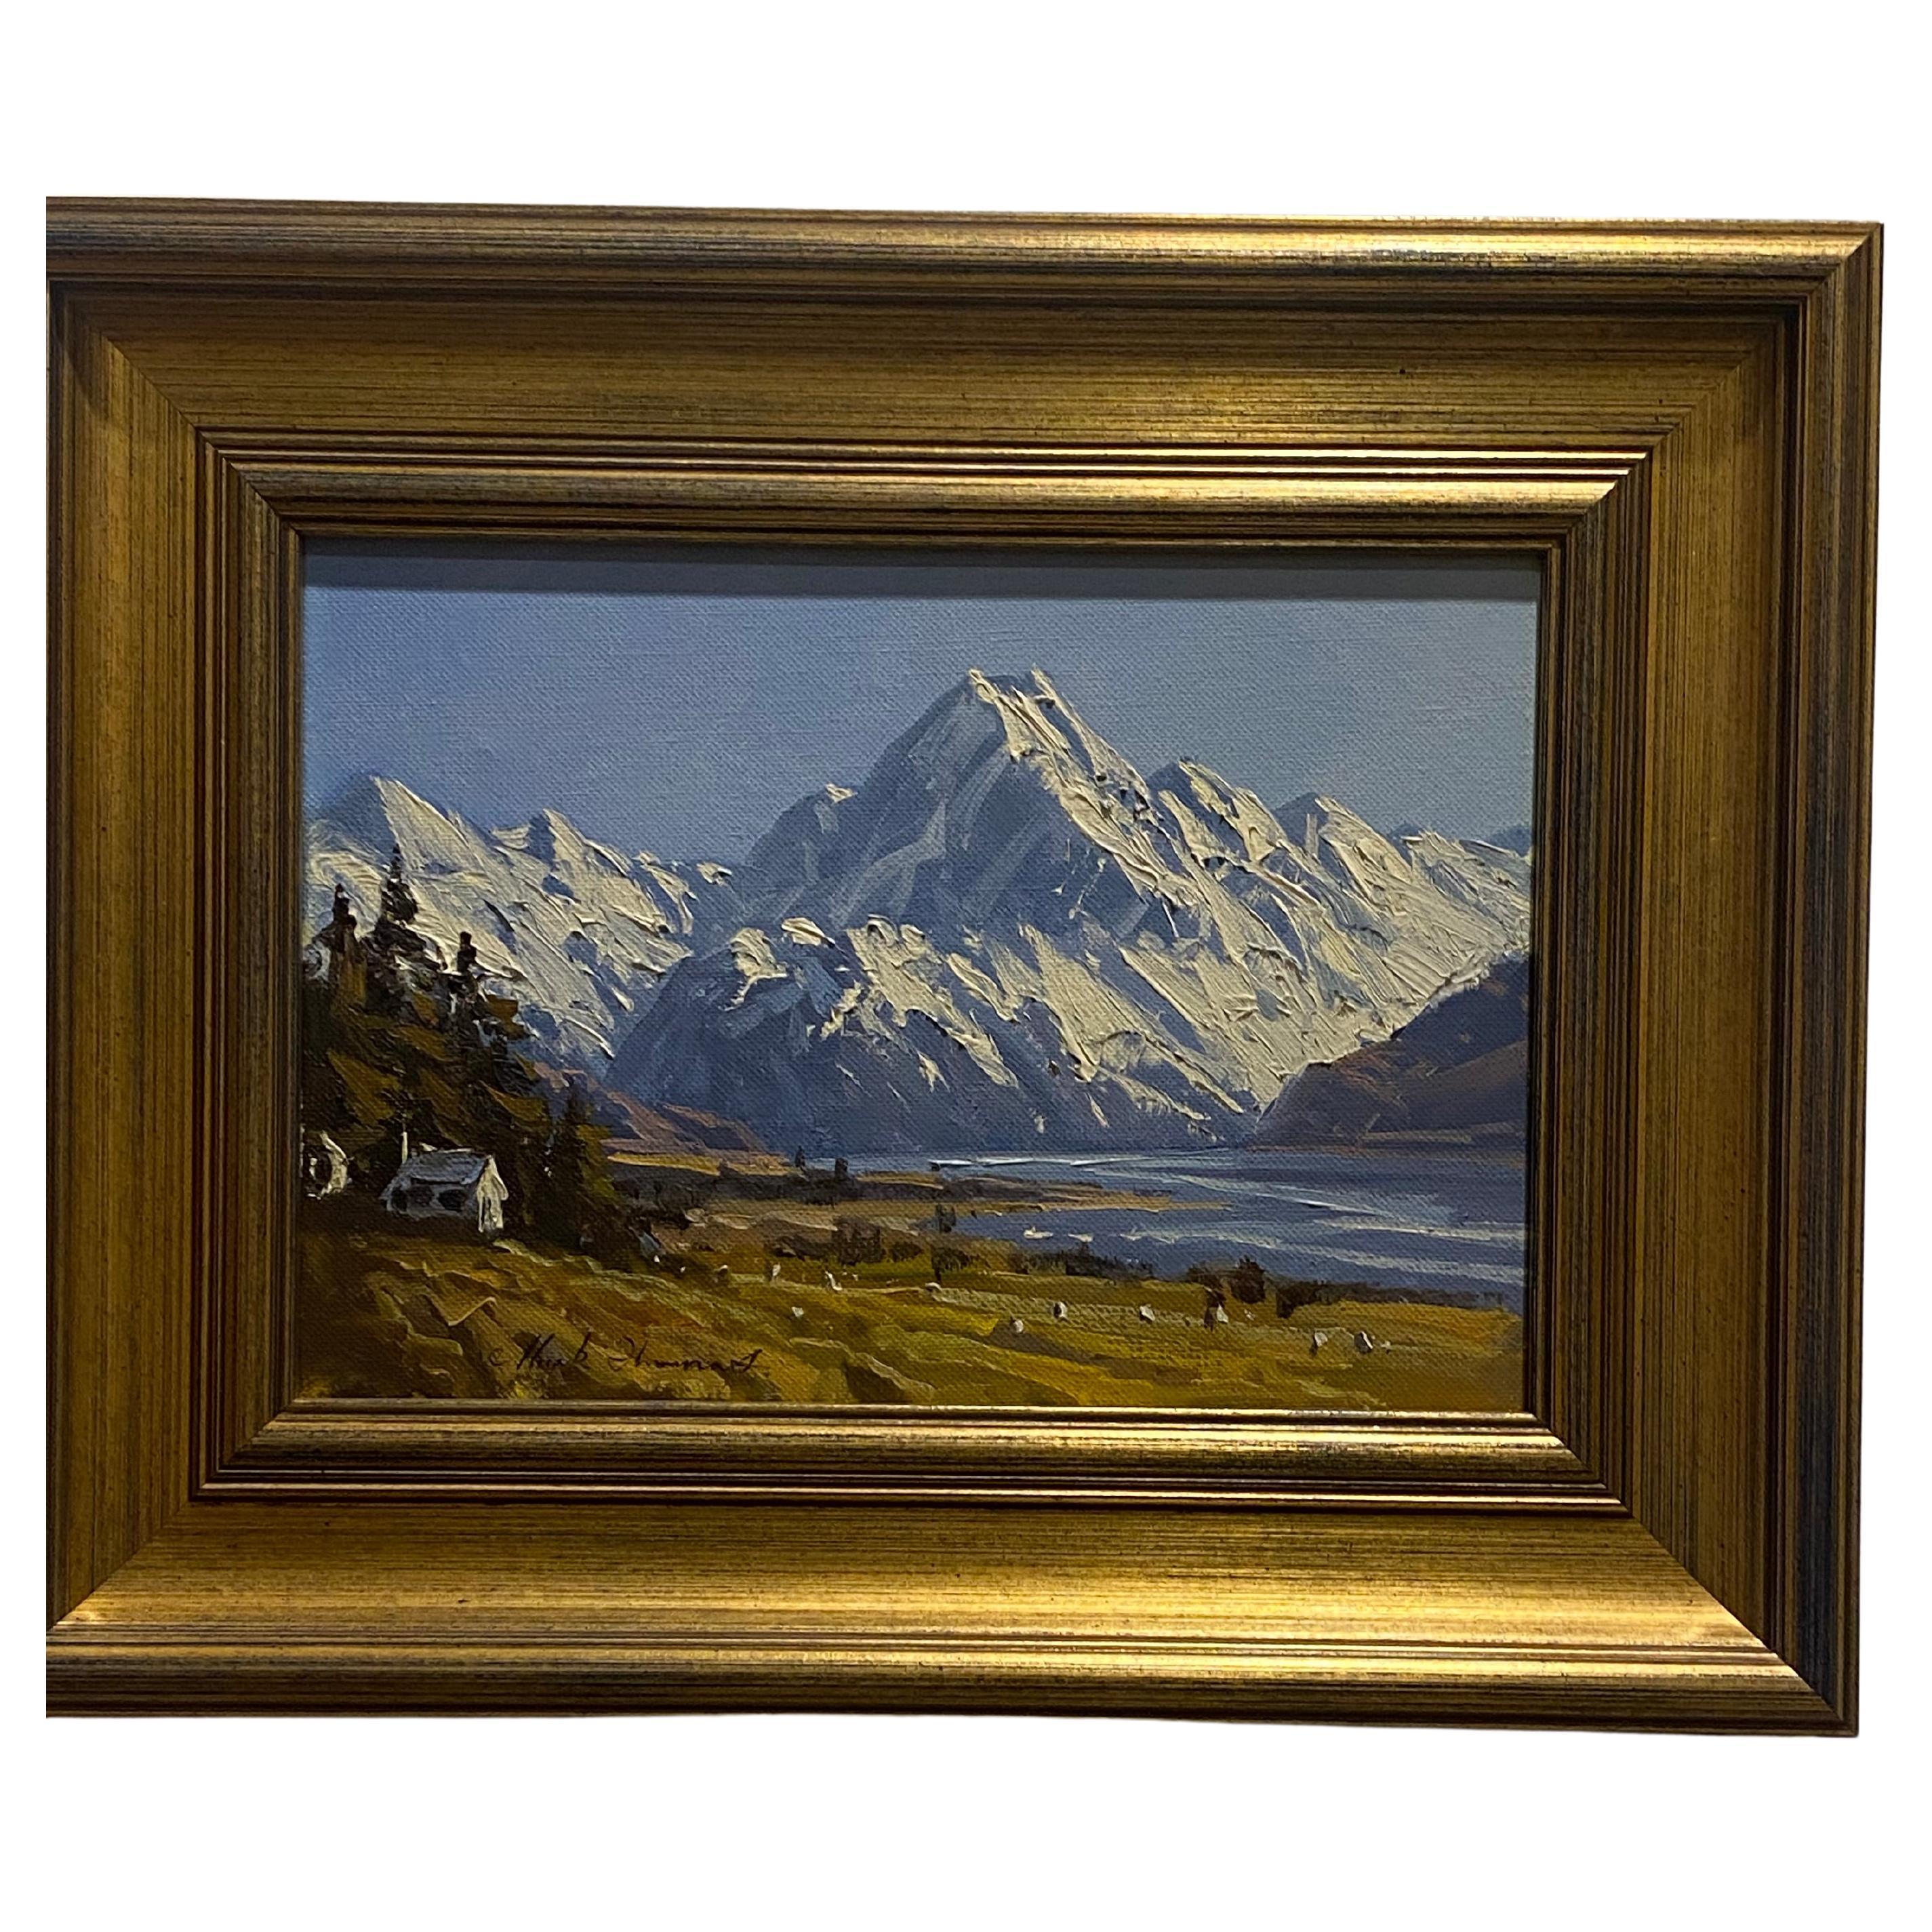 M. Thomas (New Zealand) "Lillybank Station Mt. Cook" 1986 Oil on Canvas Painting For Sale